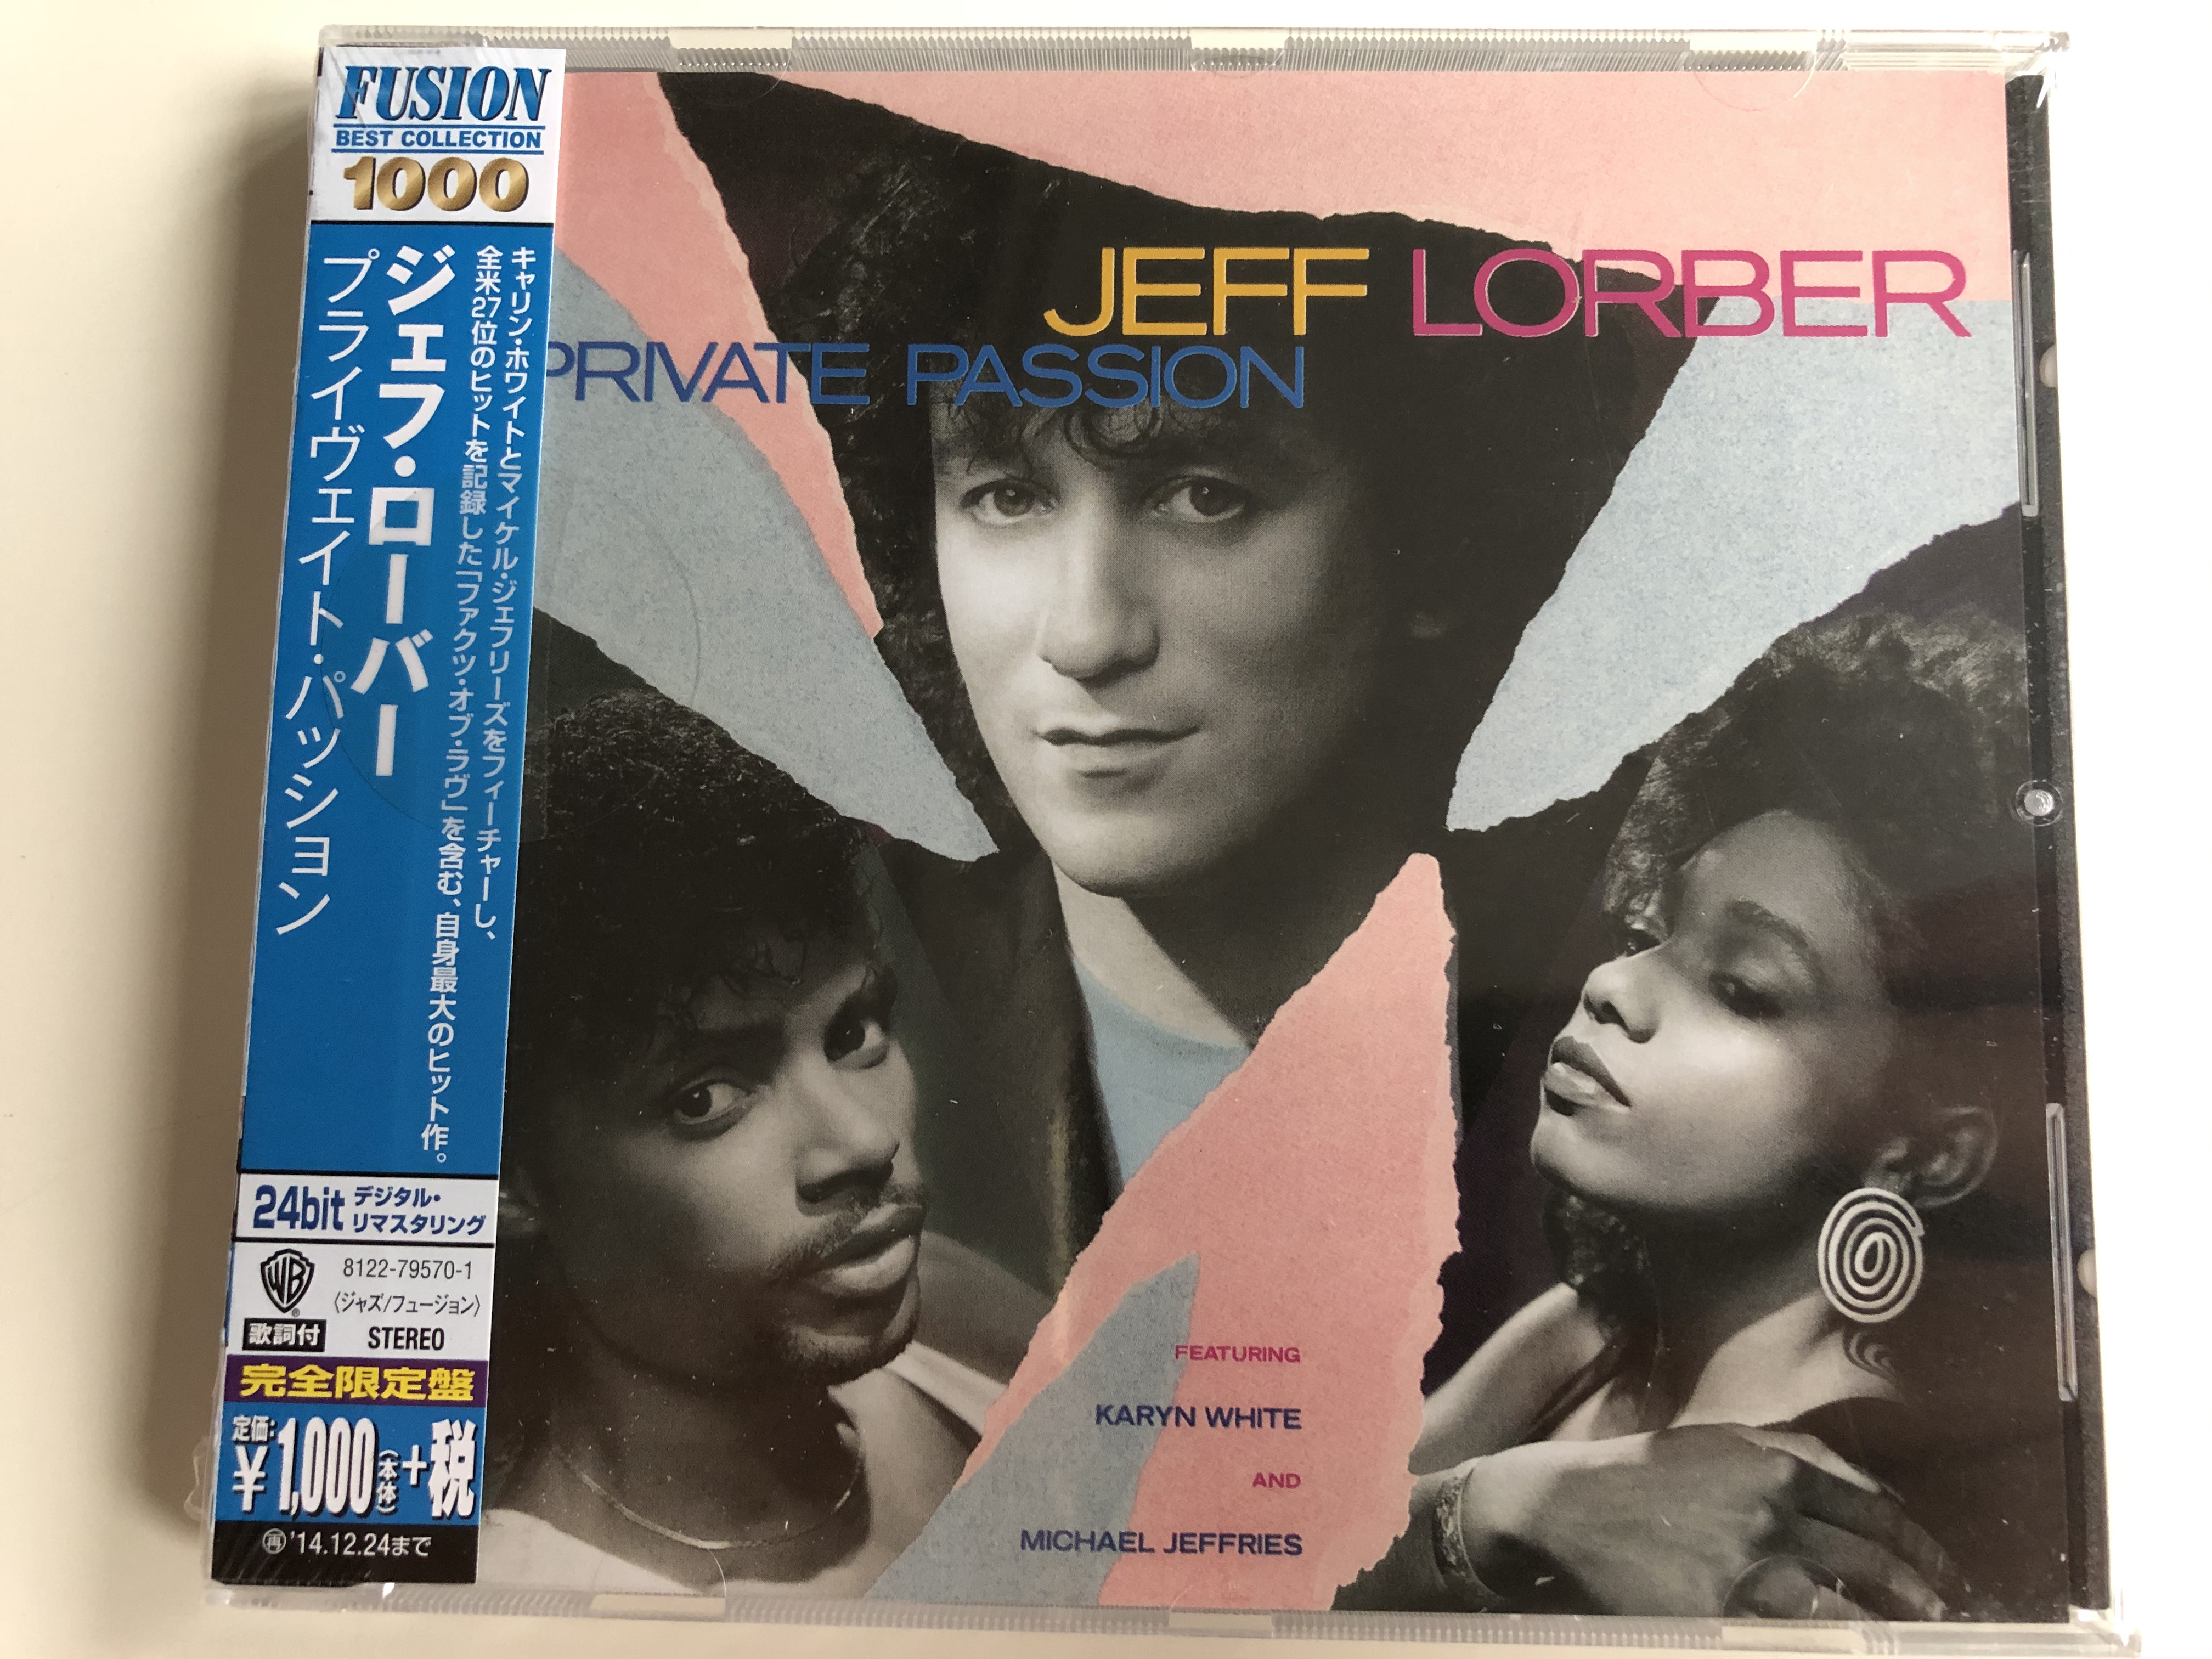 jeff-lorber-private-passion-featuring-karyn-white-and-michael-jeffries-fusion-best-collection-1000-warner-bros.-records-audio-cd-2014-stereo-8122-79570-1-1-.jpg